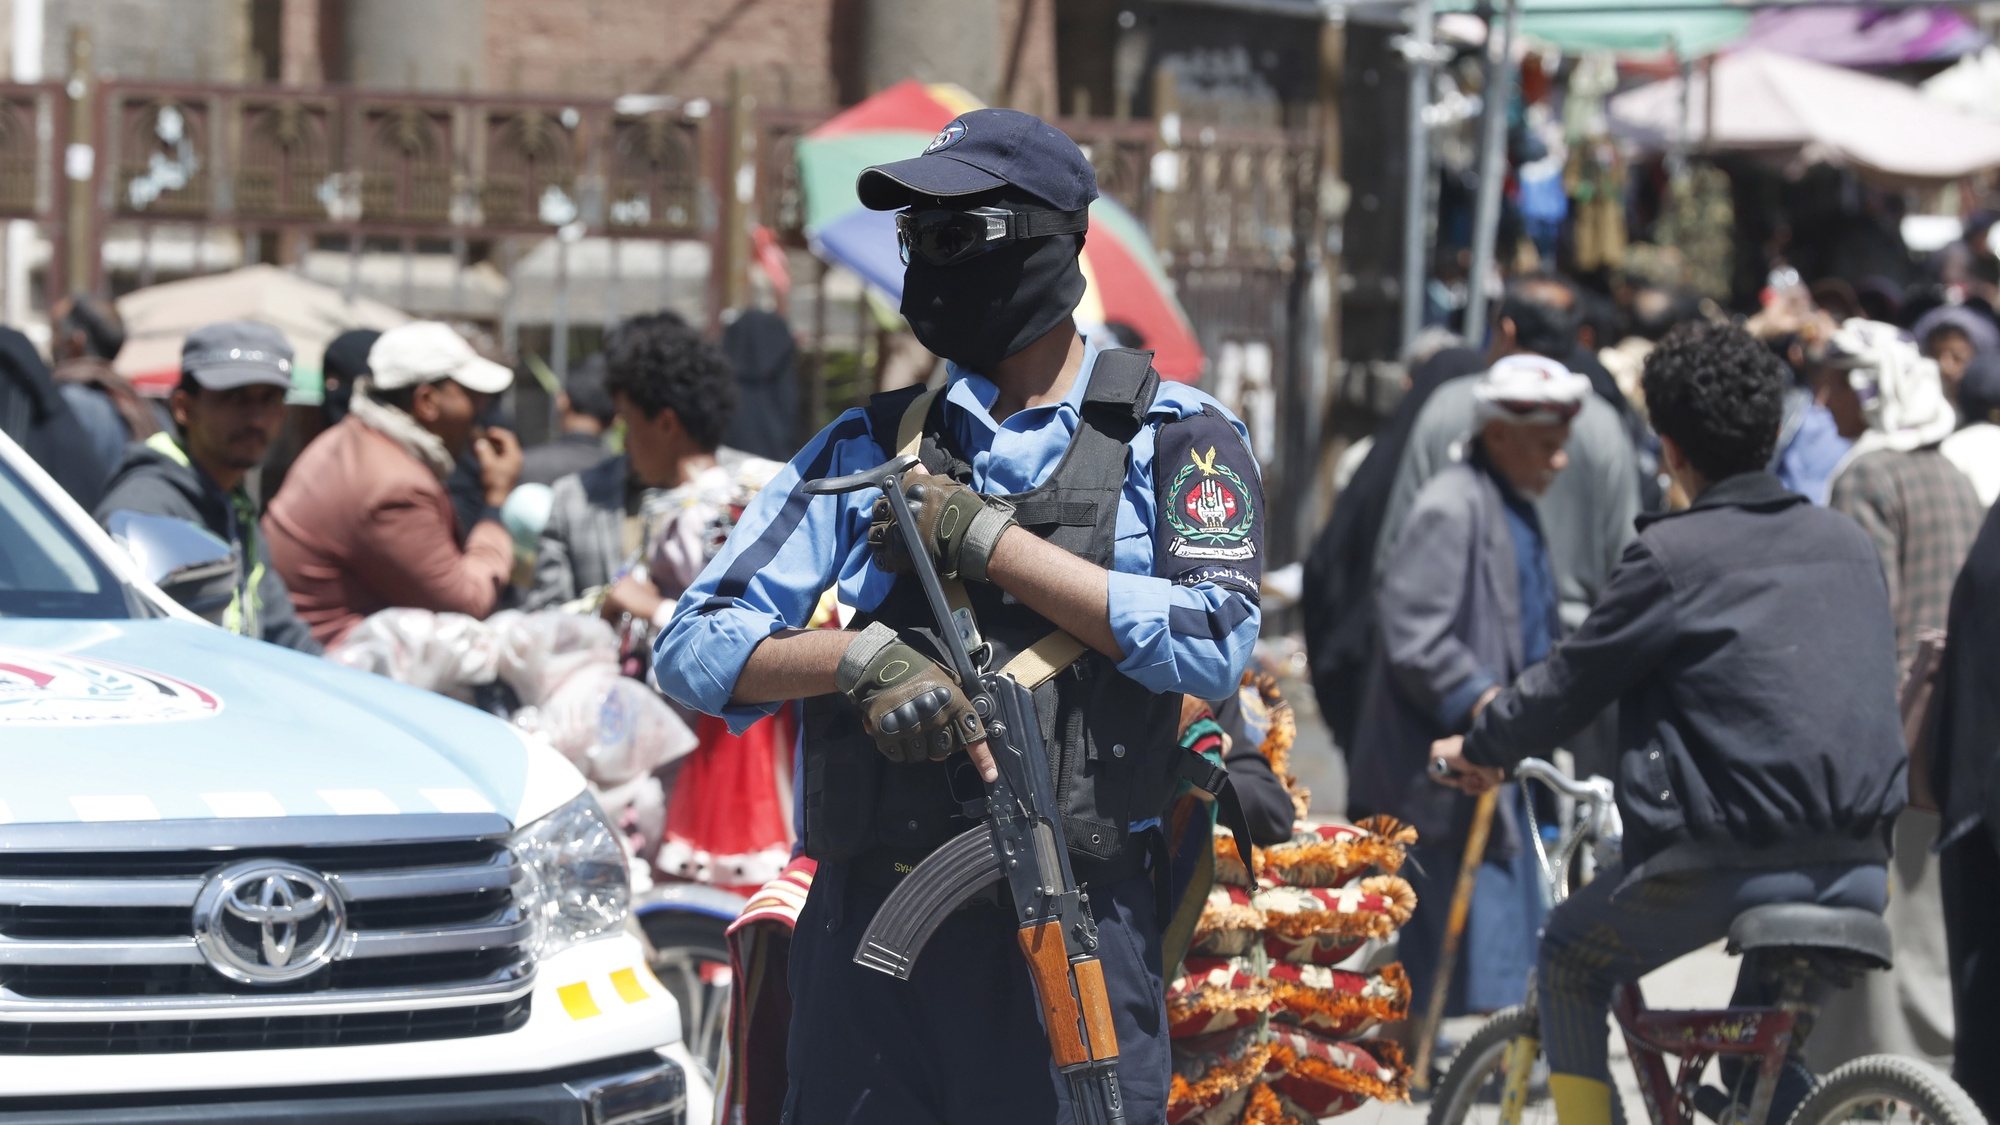 epa09847735 An armed policeman, wearing a face mask, keeps watch at a street ahead of the seventh anniversary of the Saudi-led military campaign on Yemen, in Sana’a, Yemen, 24 March 2022. UN special envoy for Yemen Hans Grundberg and Gulf countries continue to persuade the warring factions in Yemen, including the Houthis, to accept a UN proposal of a nationwide truce during the Muslim holy month of Ramadan, which will start in early April 2022. The possible truce seeks to halt all military activities across Yemen and Houthis-unleashed drone and missile attacks against Saudi Arabia which leads a military campaign against the Houthis since 26 March 2015 for restoring the Yemeni government.  EPA/YAHYA ARHAB